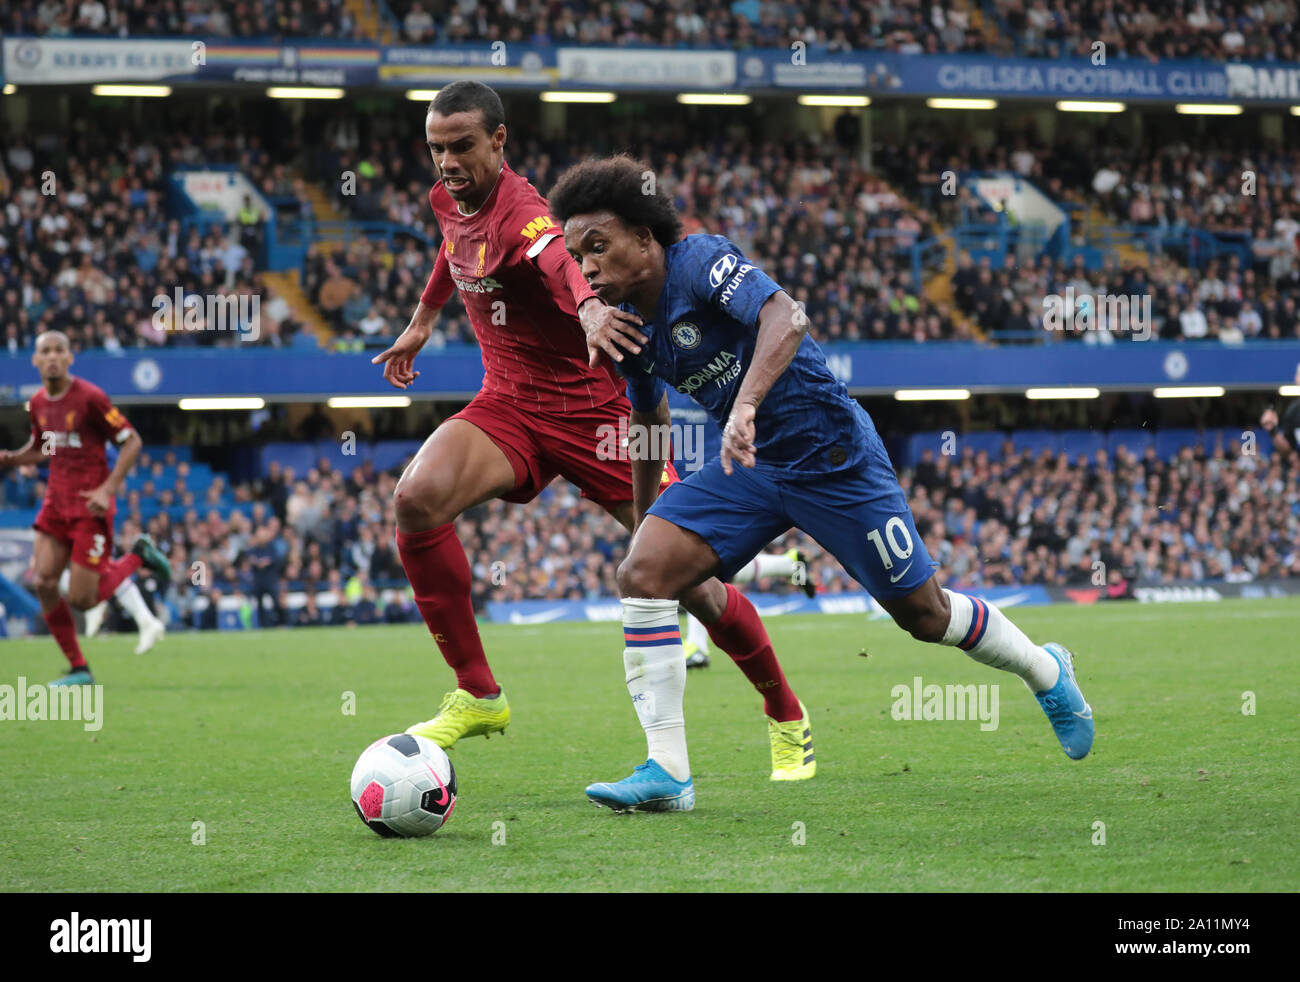 LONDON, ENGLAND - SEPTEMBER 22: Liverpool’s Joel Matip tackles Chelsea’s Willian during the Premier League match between Chelsea FC and Liverpool FC at Stamford Bridge on September 22, 2019 in London, United Kingdom. (Hugo Philpott/MB Media) Stock Photo